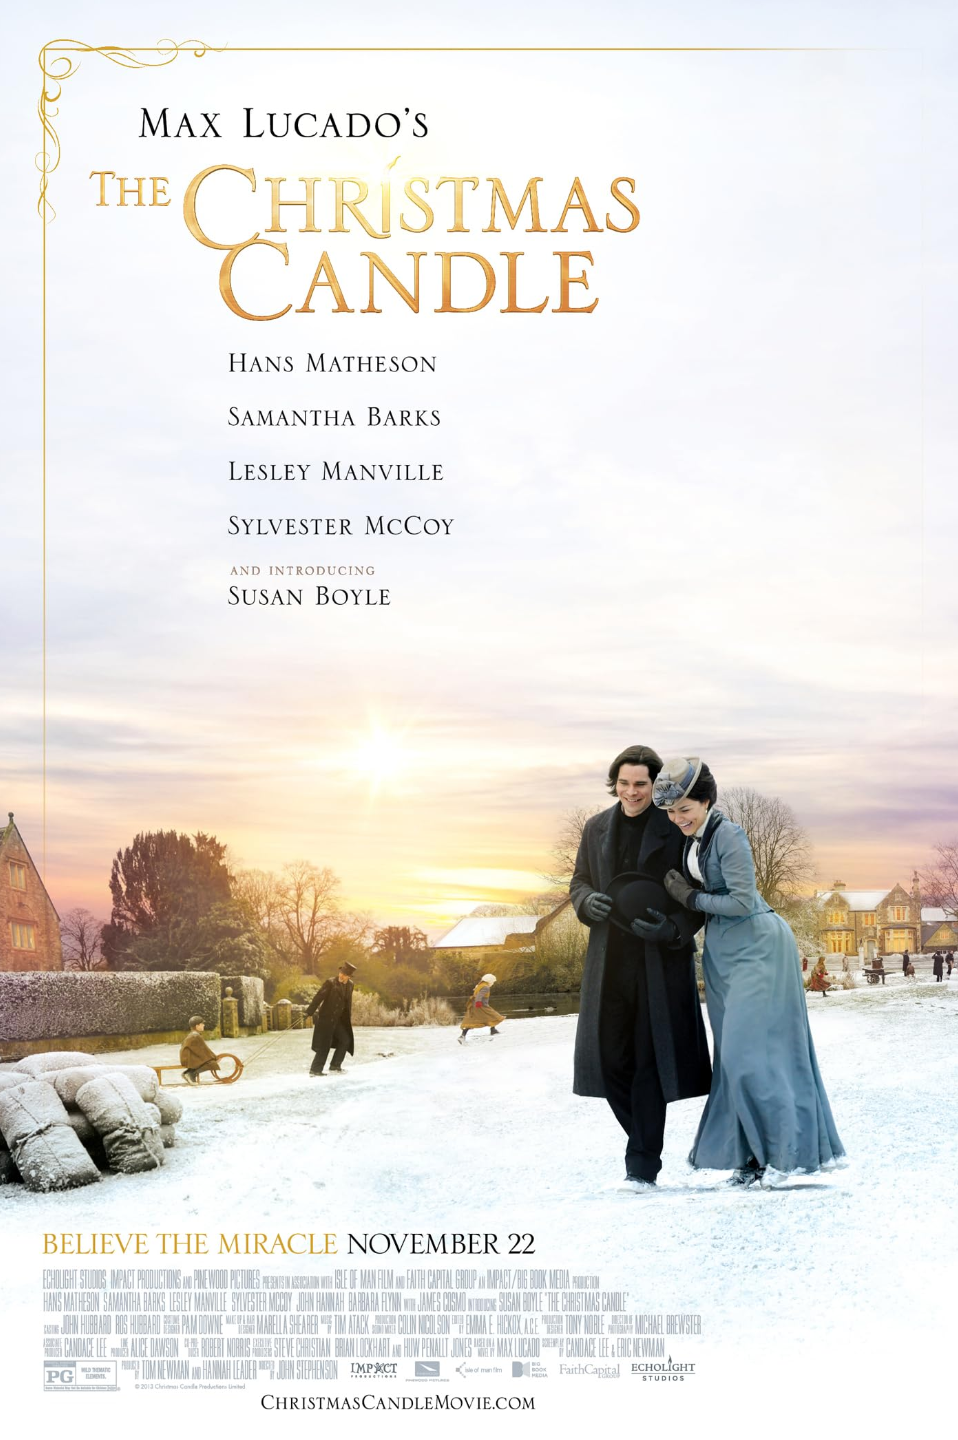 the christmas candle movie poster with man and woman in snow